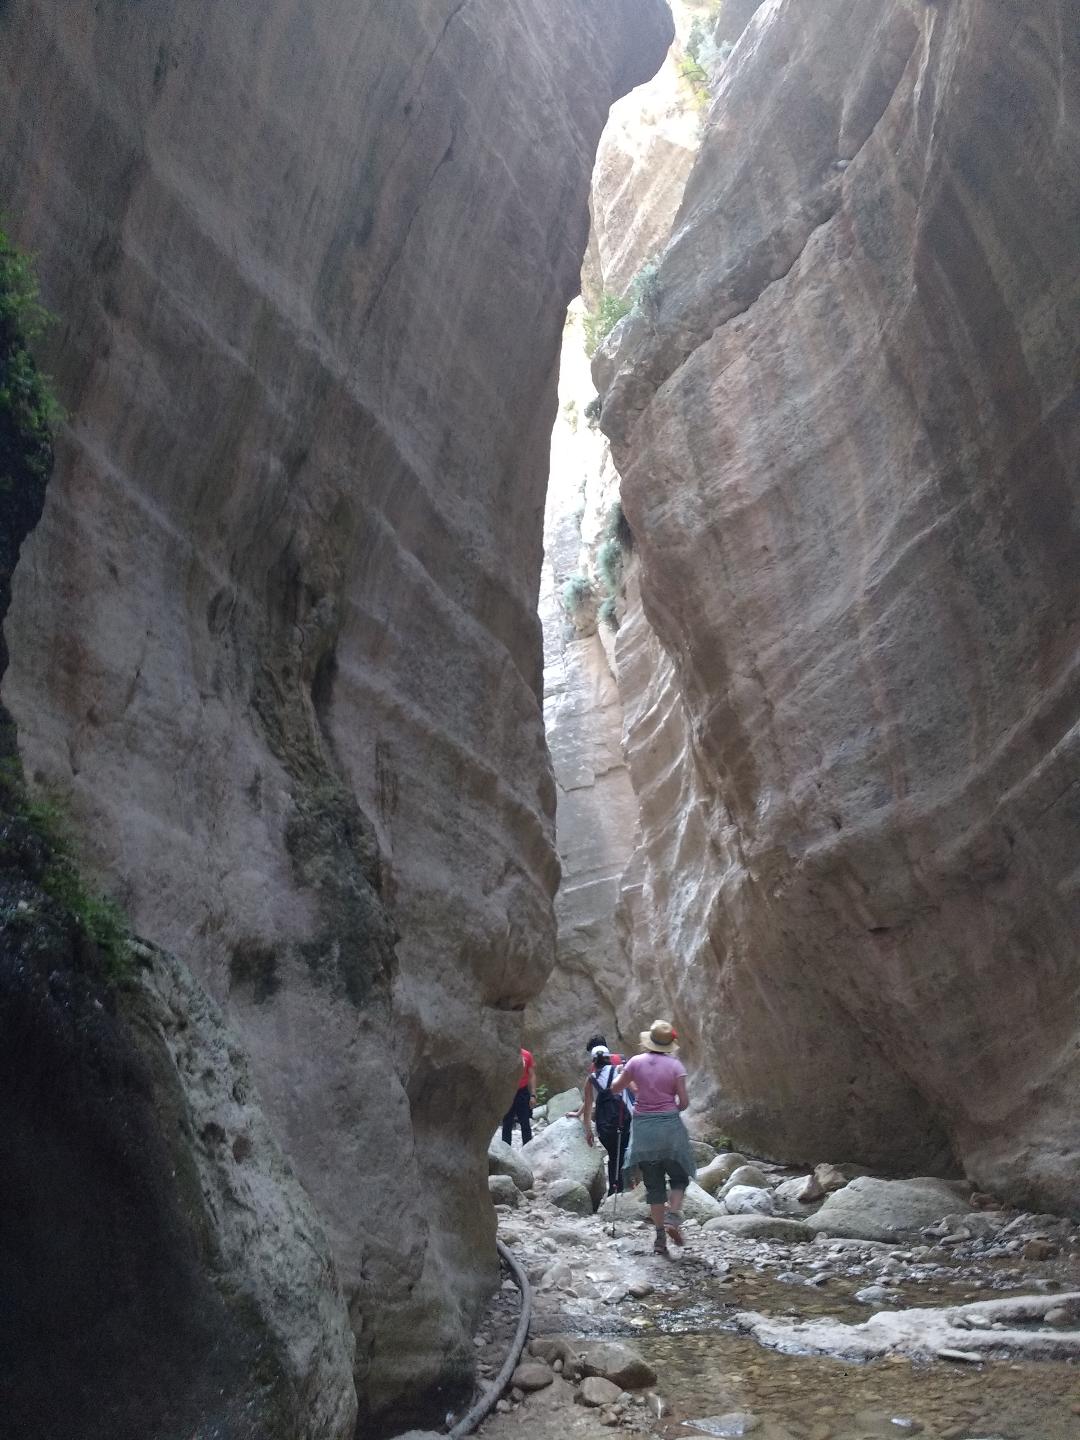 A number of walkers inside a narrow limestone gorge